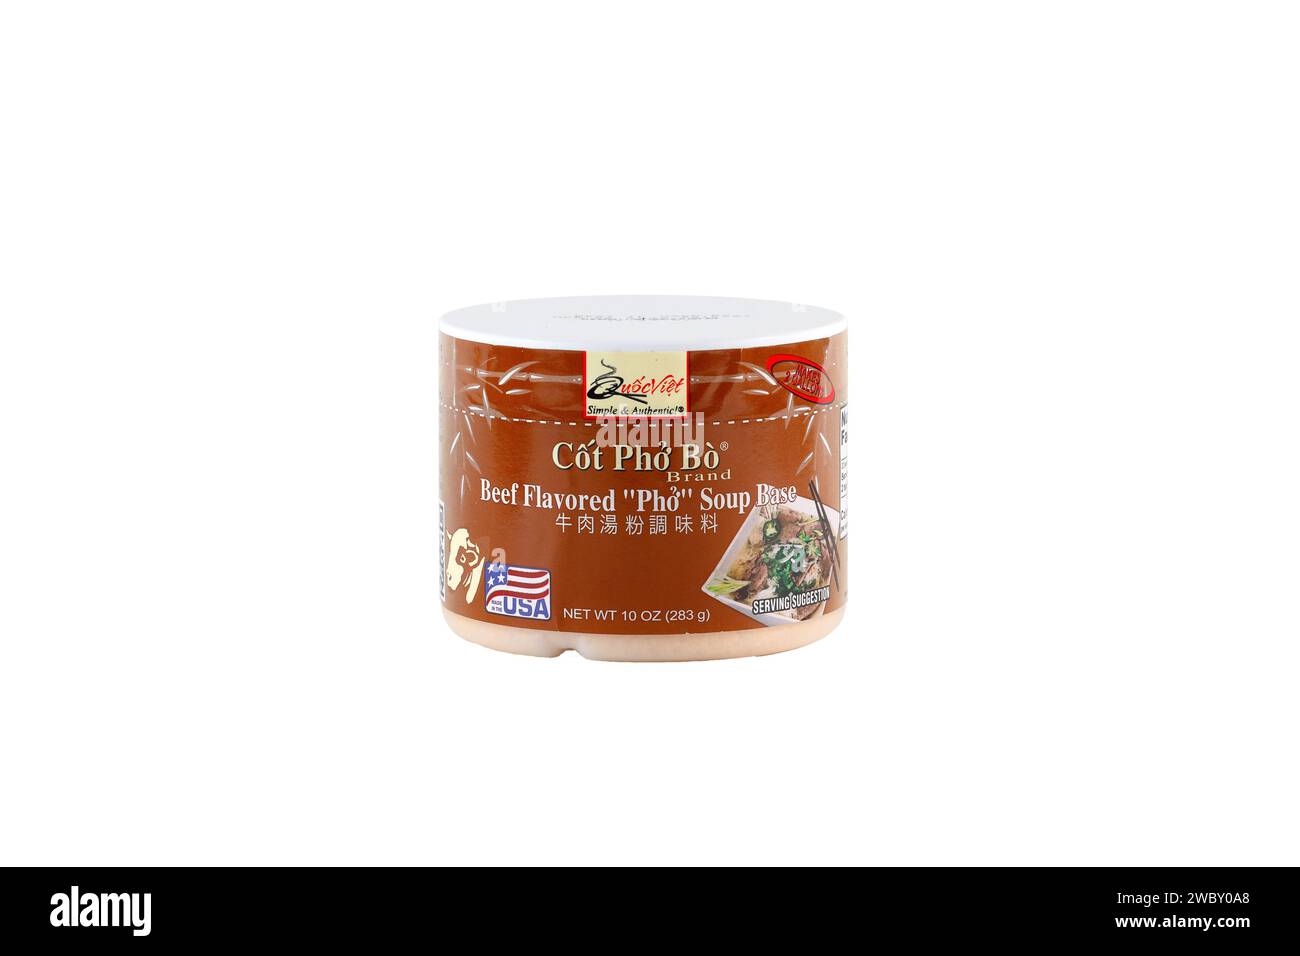 A container of Quốc Việt brand Cốt Phở Bò beef flavored Pho soup base isolated on a white background. cutout image for illustration and editorial use Stock Photo